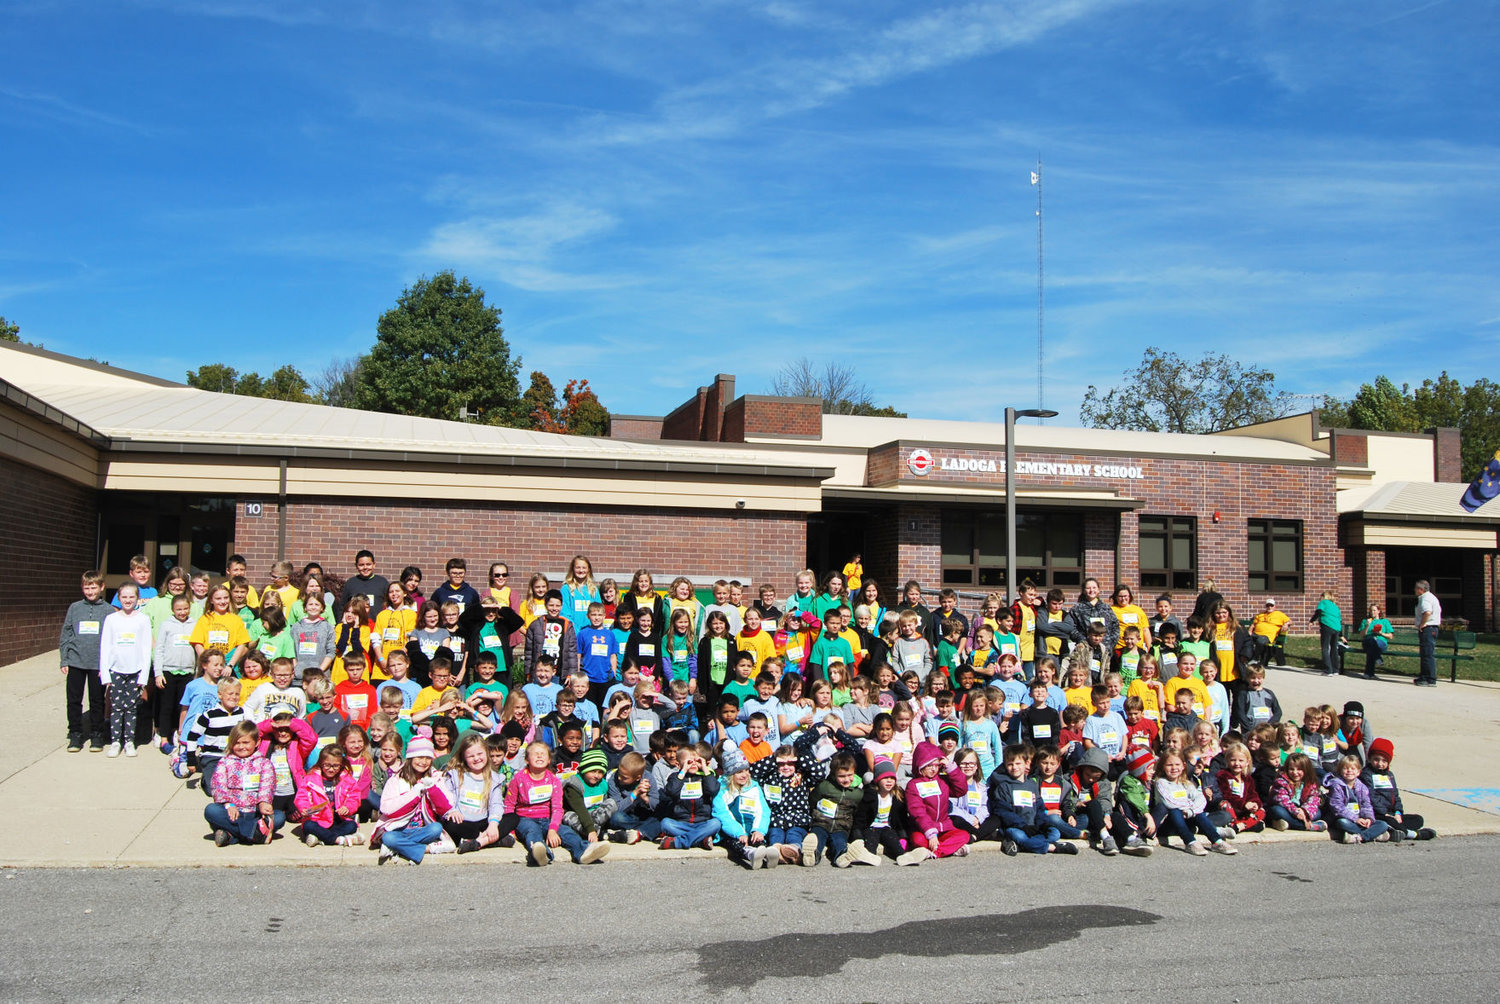 All of the students participating in the run-a-ton. Little over 190 students in total.